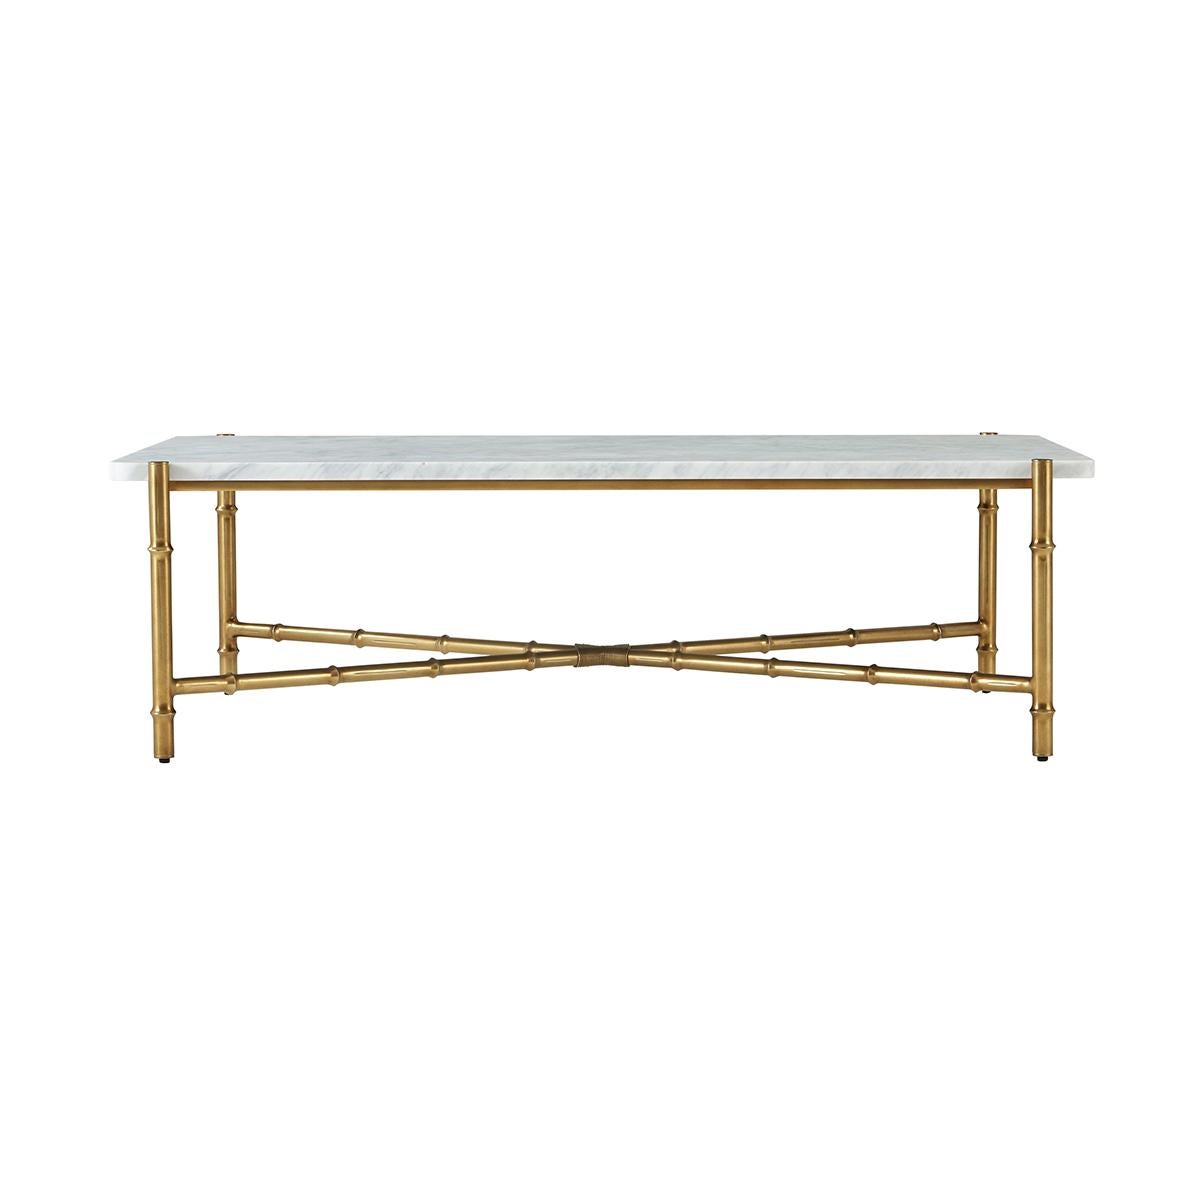 Slender lines form a light and airy design in this modern table. A graceful combination of white bianco marble atop an organic faux bois base in a satin bronze finish.

Dimensions: 55